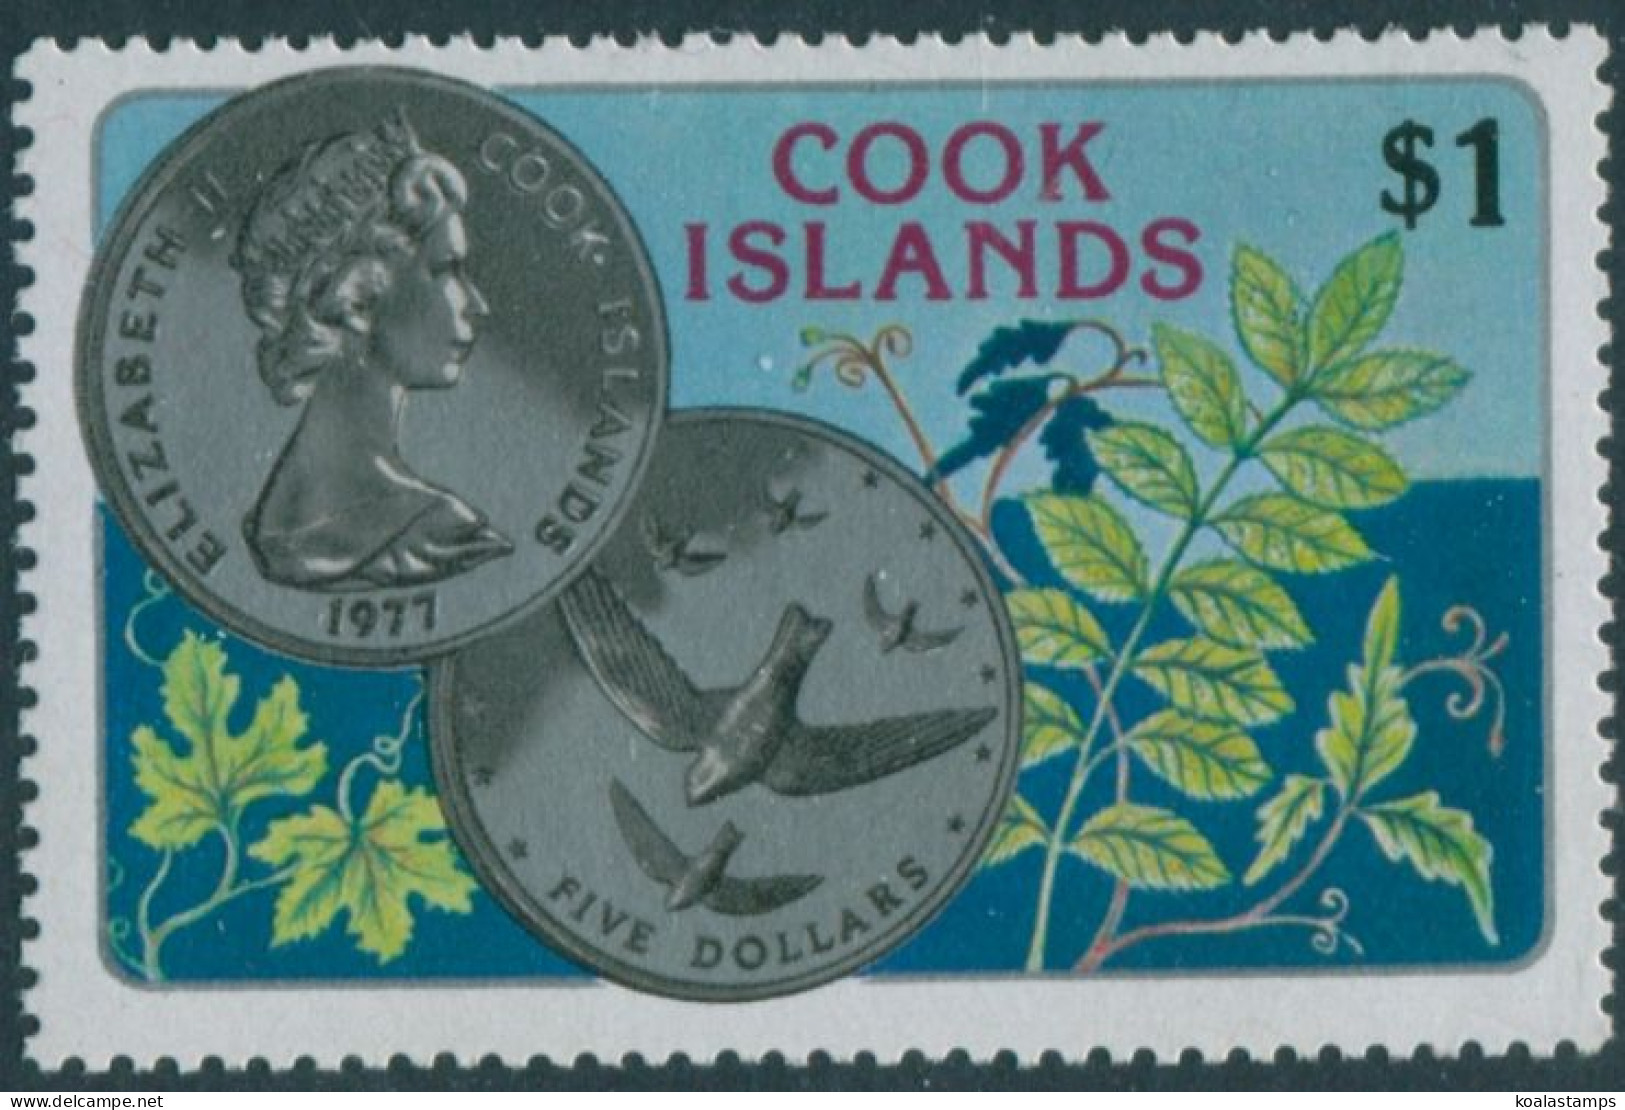 Cook Islands 1977 SG583 $1 National Wildlife Coin MNH - Cookinseln